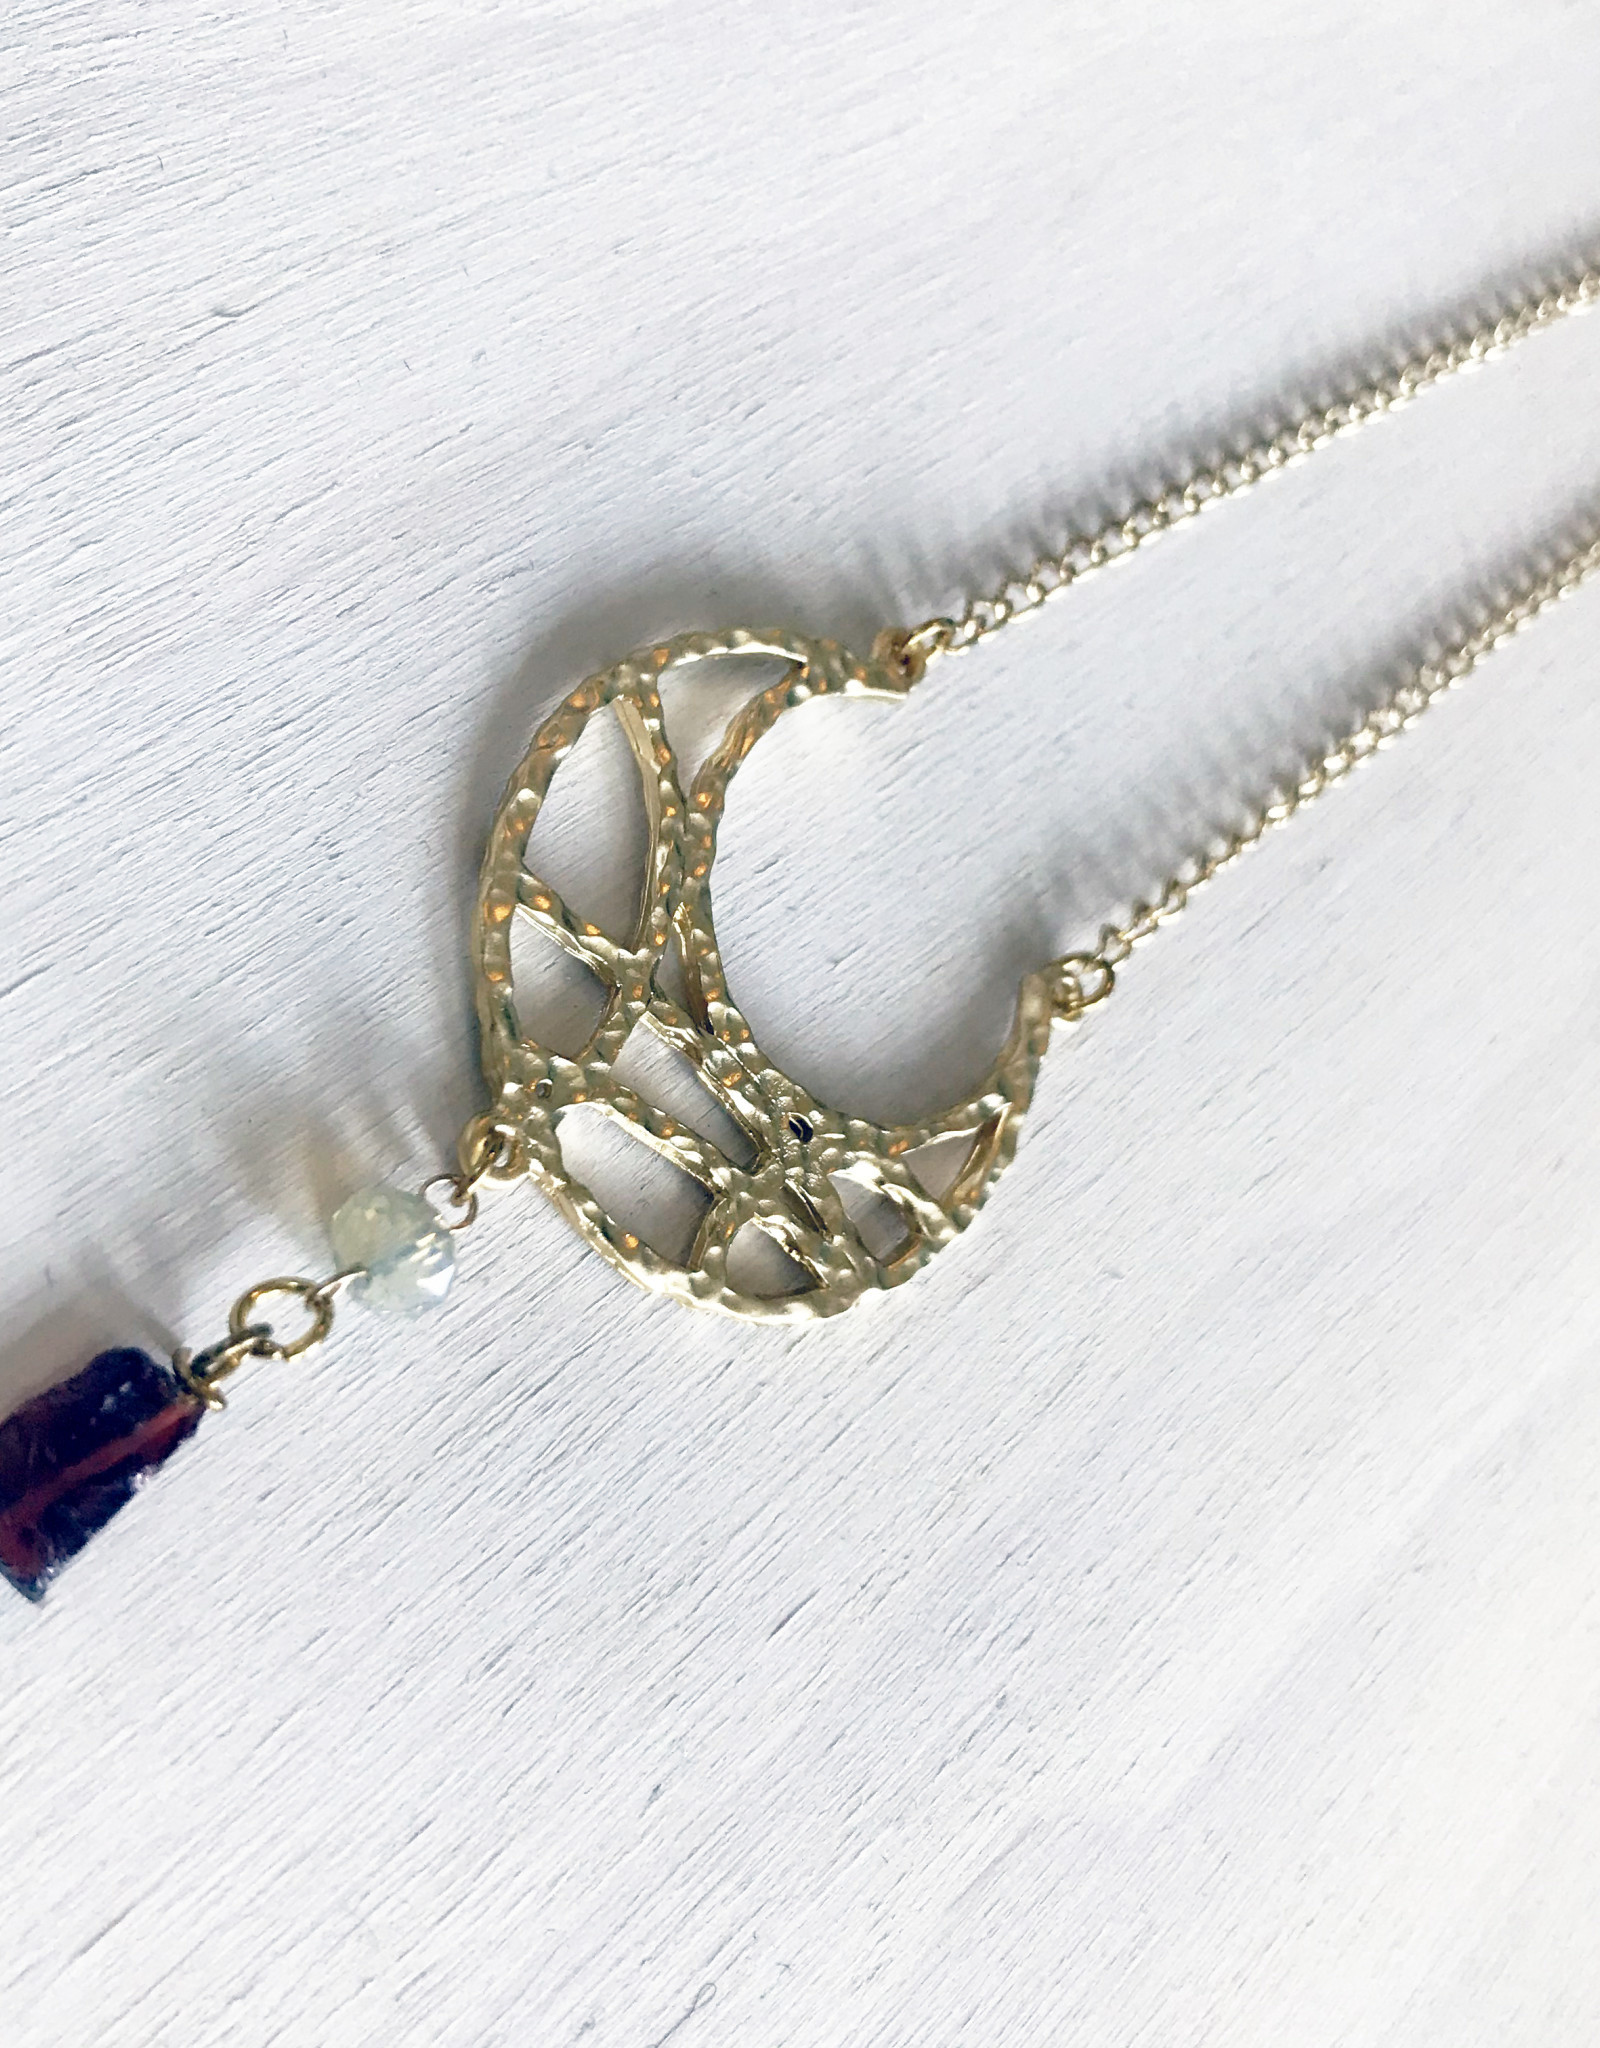 Devil May Wear Wandering Romani Textured Crescent Moon Necklace. Gold Plated pendant. Rough Garnet drop. Swarovski Crystal. Gold plated Chain. 27"